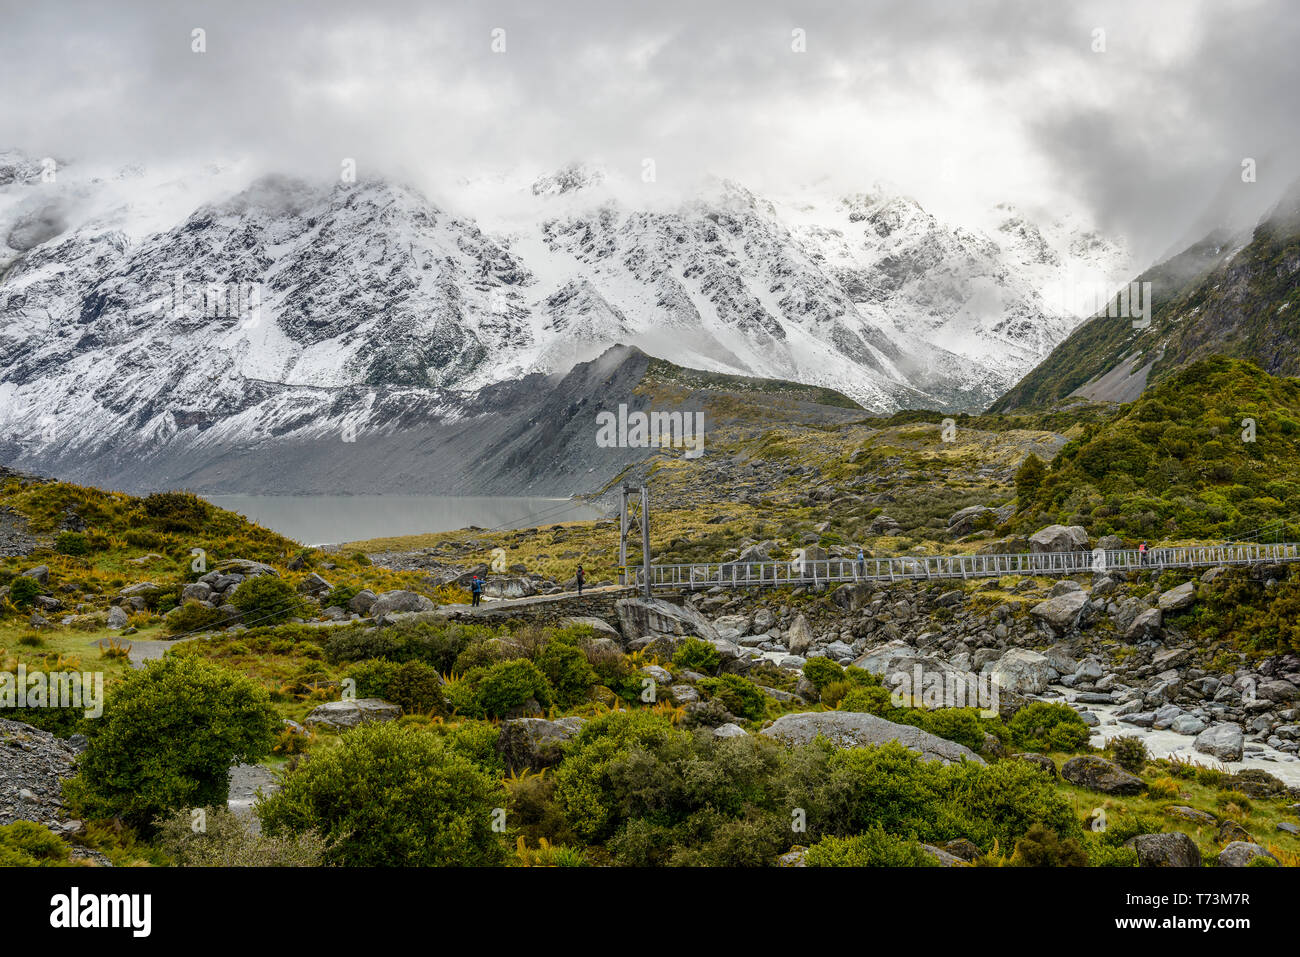 Snowy mountains and hanging bridge along the Hooker Valley Track, Mount Cook National Park; South Island, New Zealand Stock Photo